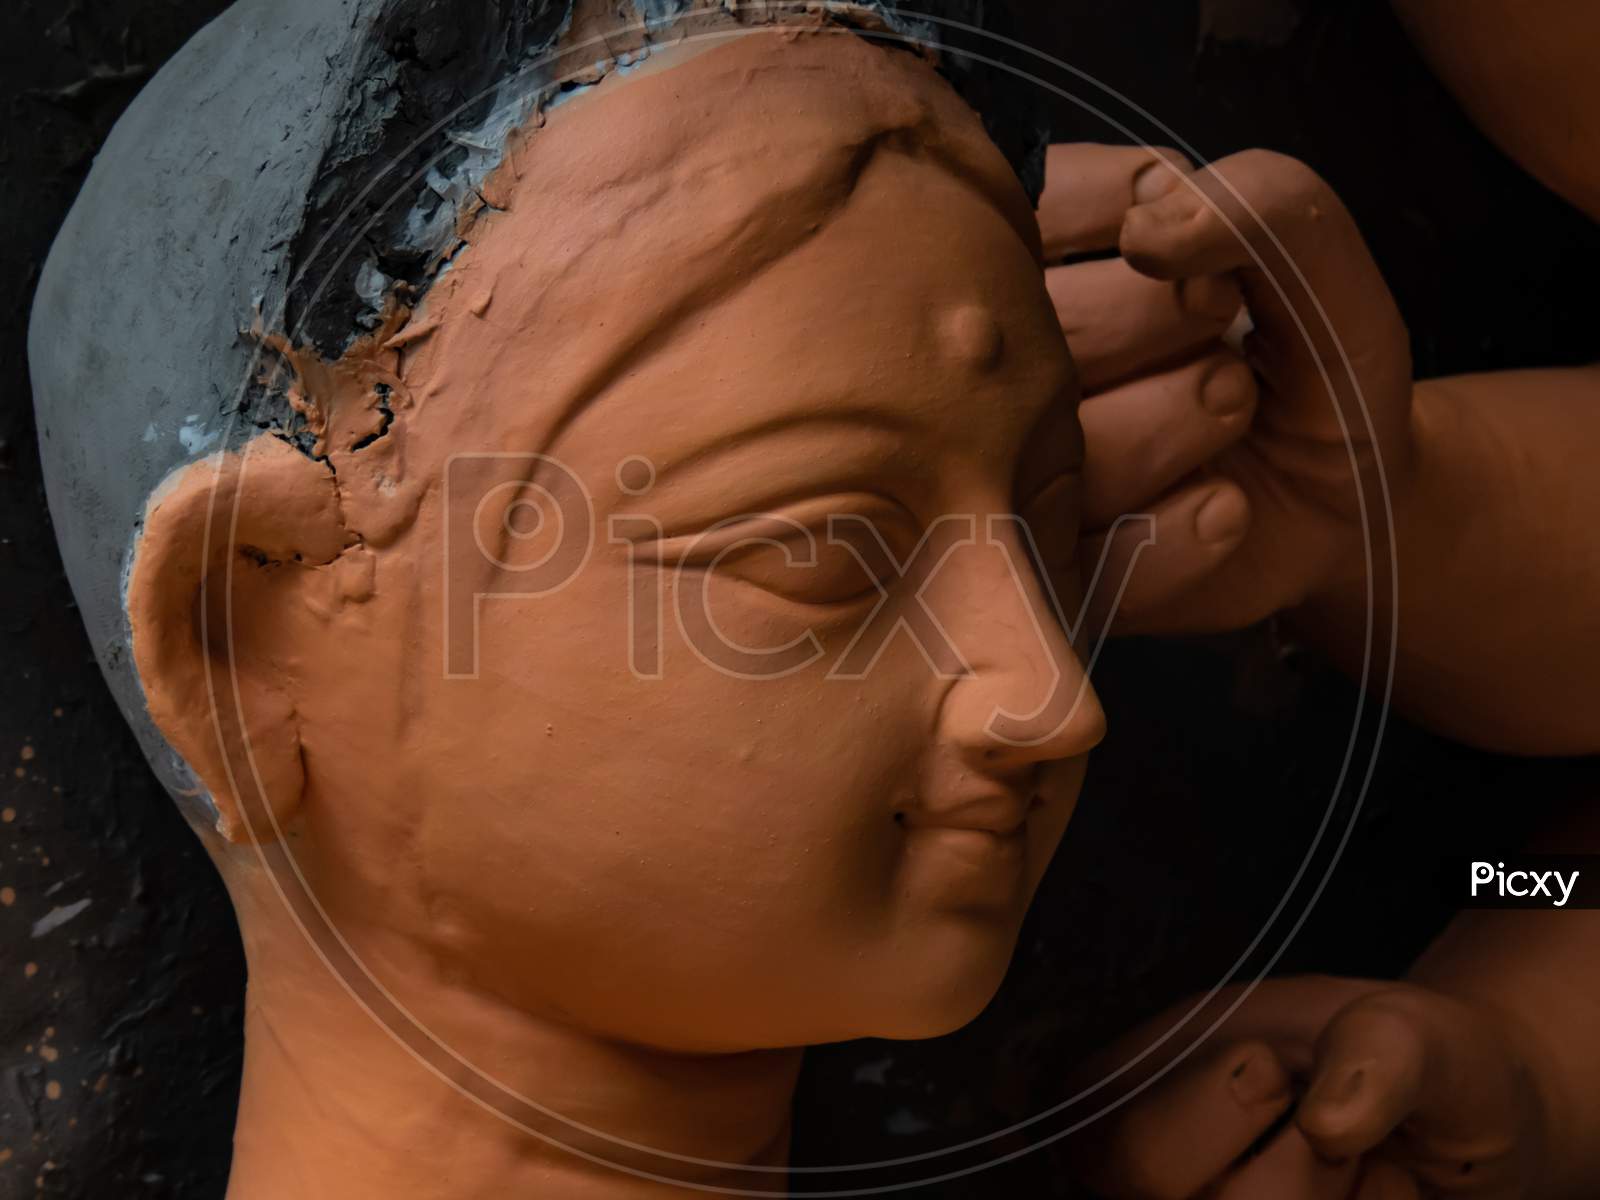 Face Of Maa Durga Idol In Making Process Or Semi Finished Stage.